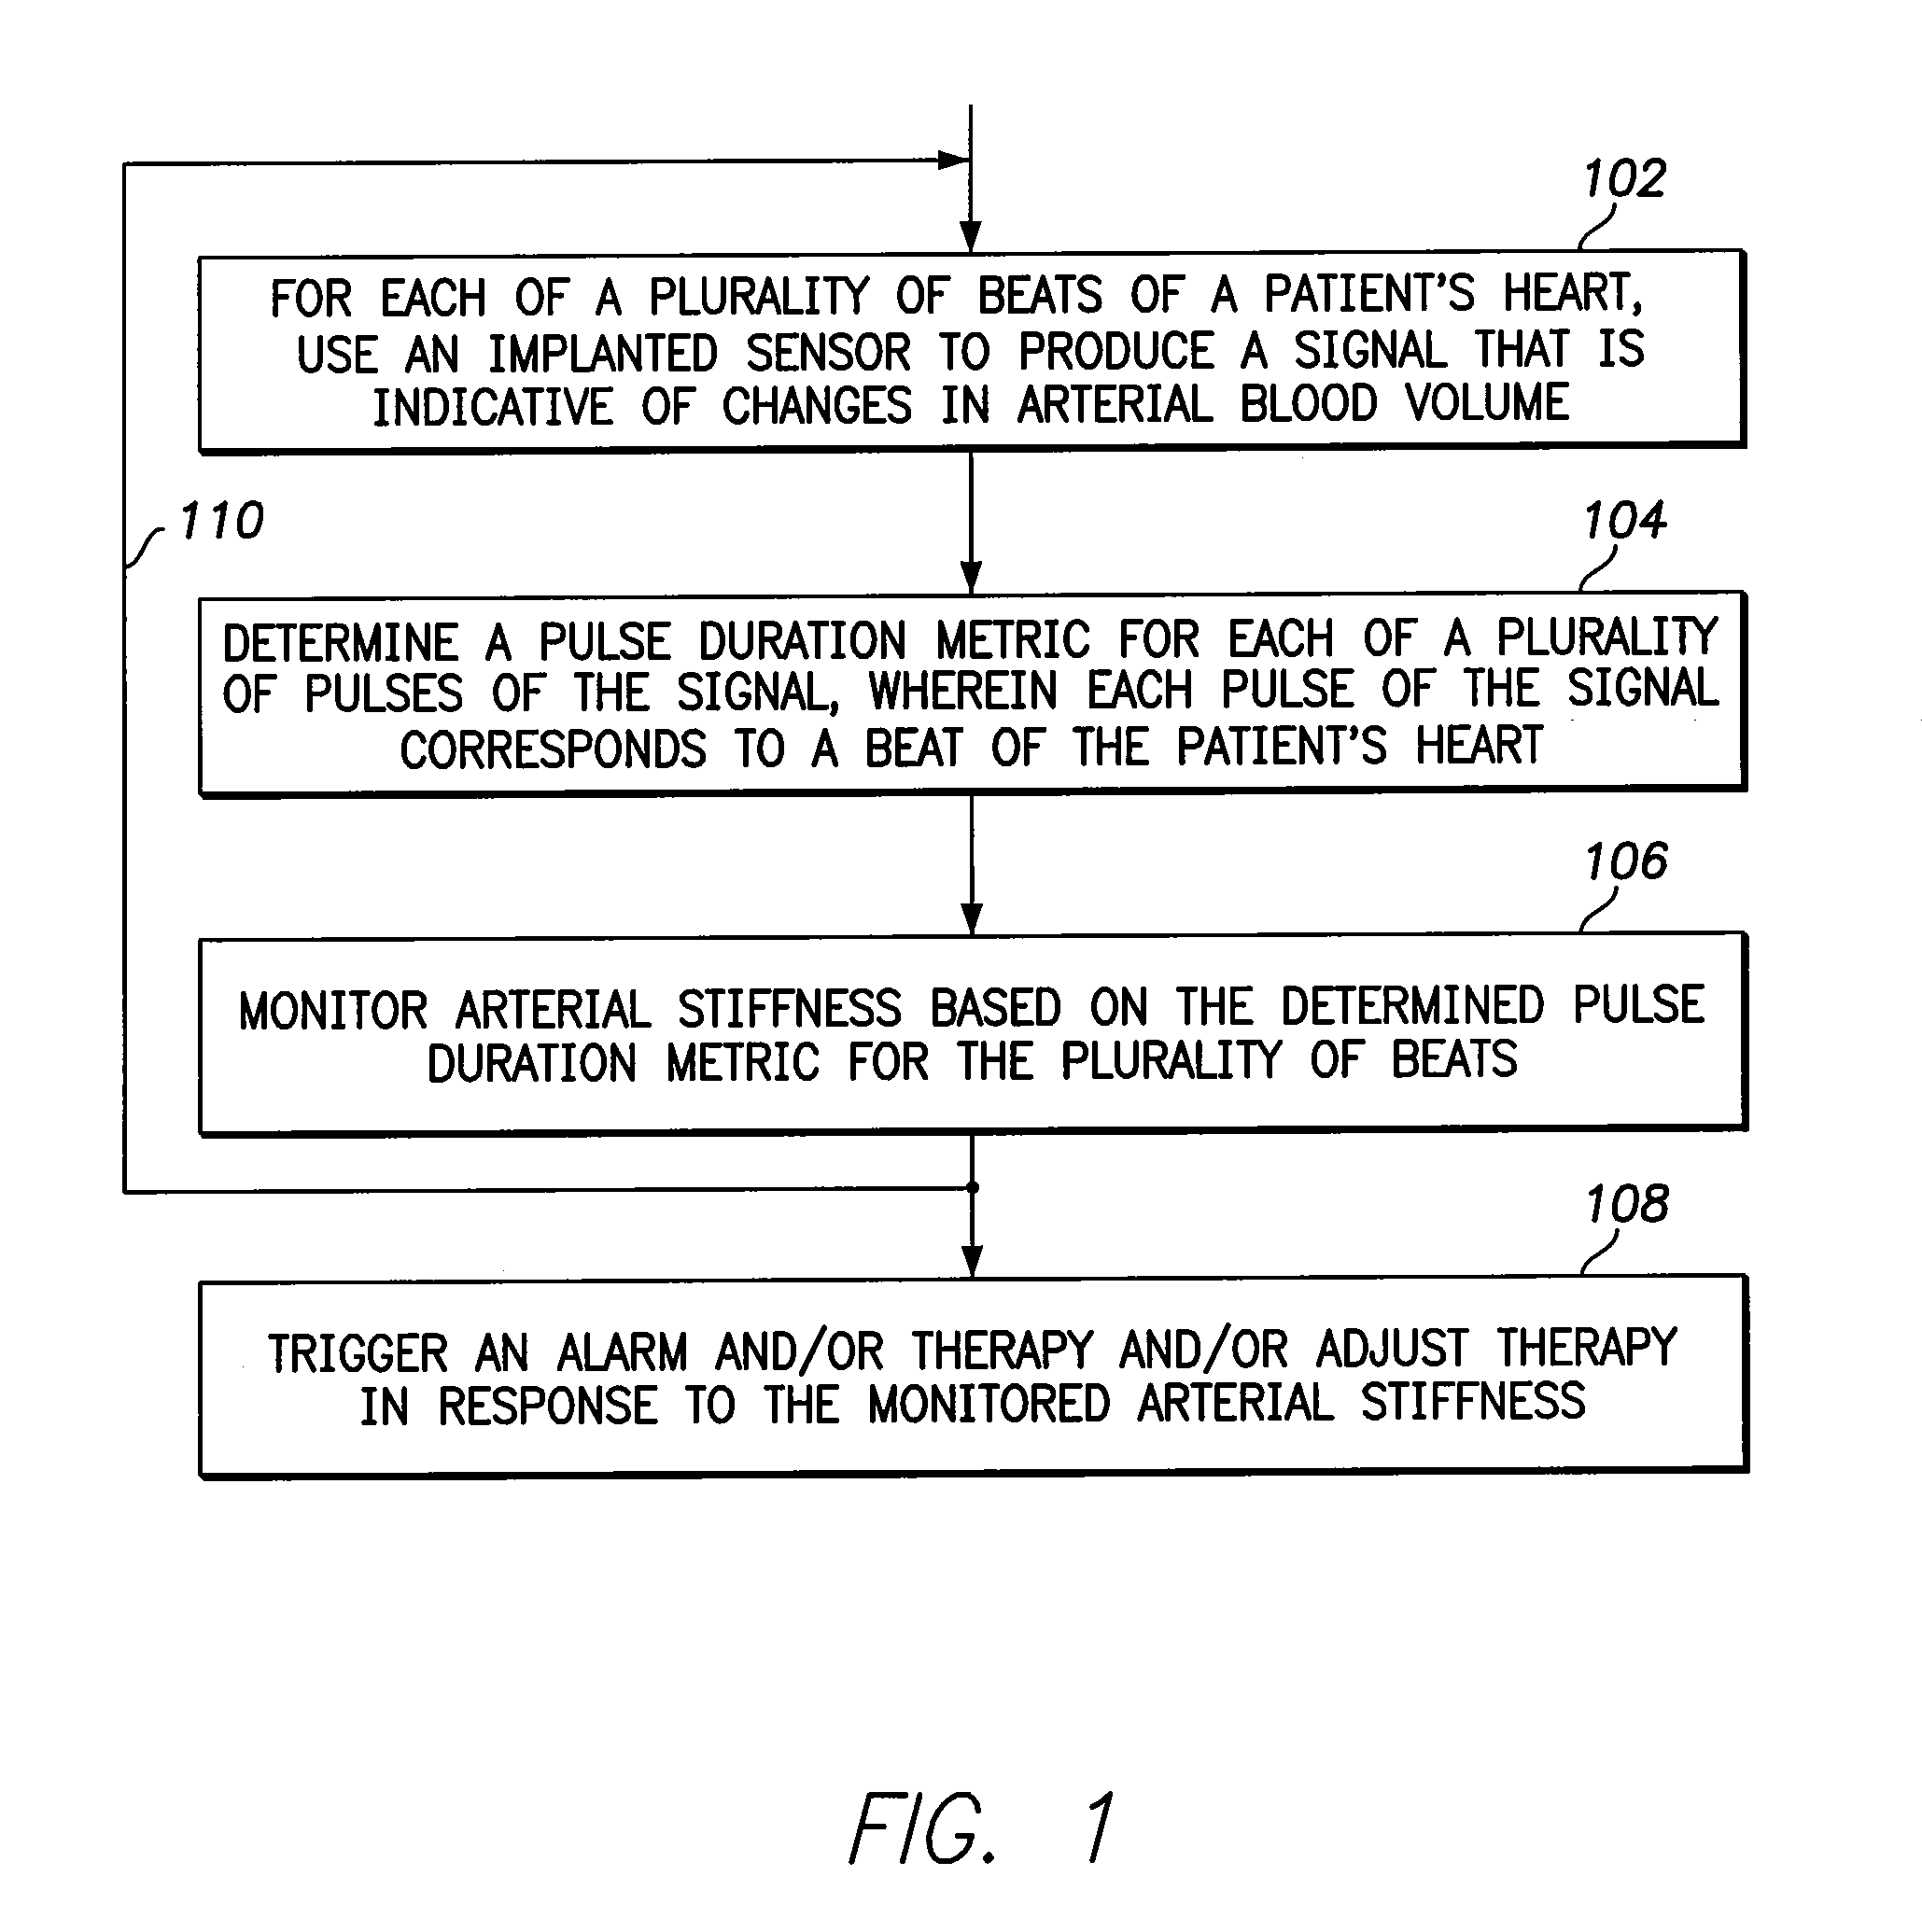 Methods and Systems for Monitoring Aterial Stiffness